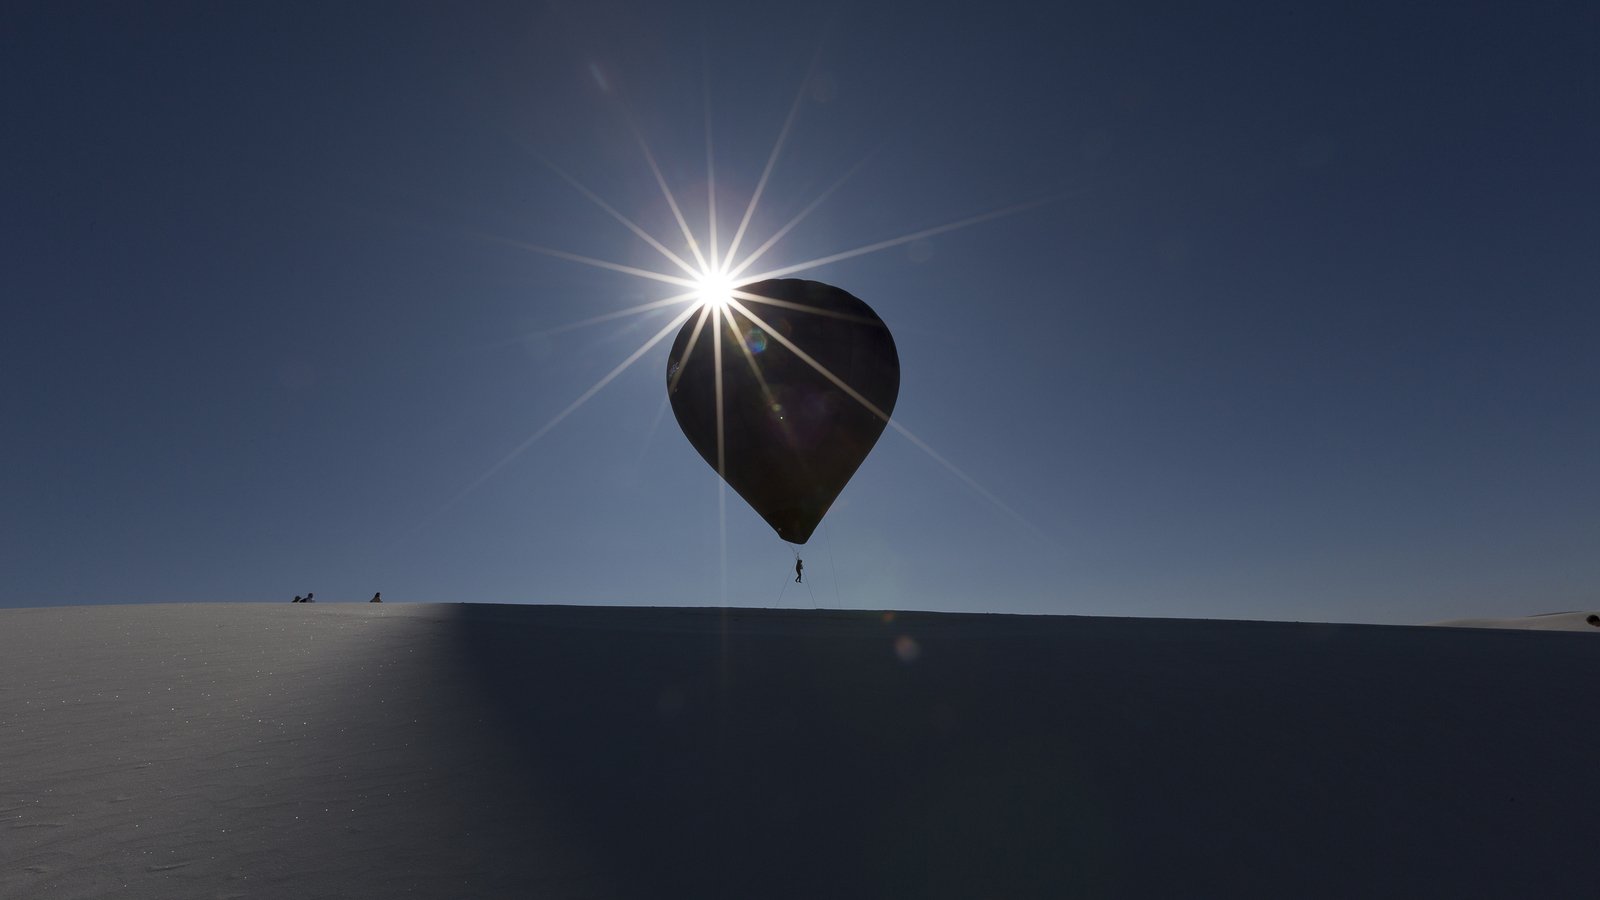 Aerocene Human Flight launches in White Sands, New Mexico, USA, 2015&nbsp;Part of Territory of the Imagination, Rubin Center for the Visual Arts, El PasoPhoto: &copy; Studio Tom&aacute;s SaracenoCourtesy Aerocene FoundationLicensed under CC BY-SA 4.0. 2019